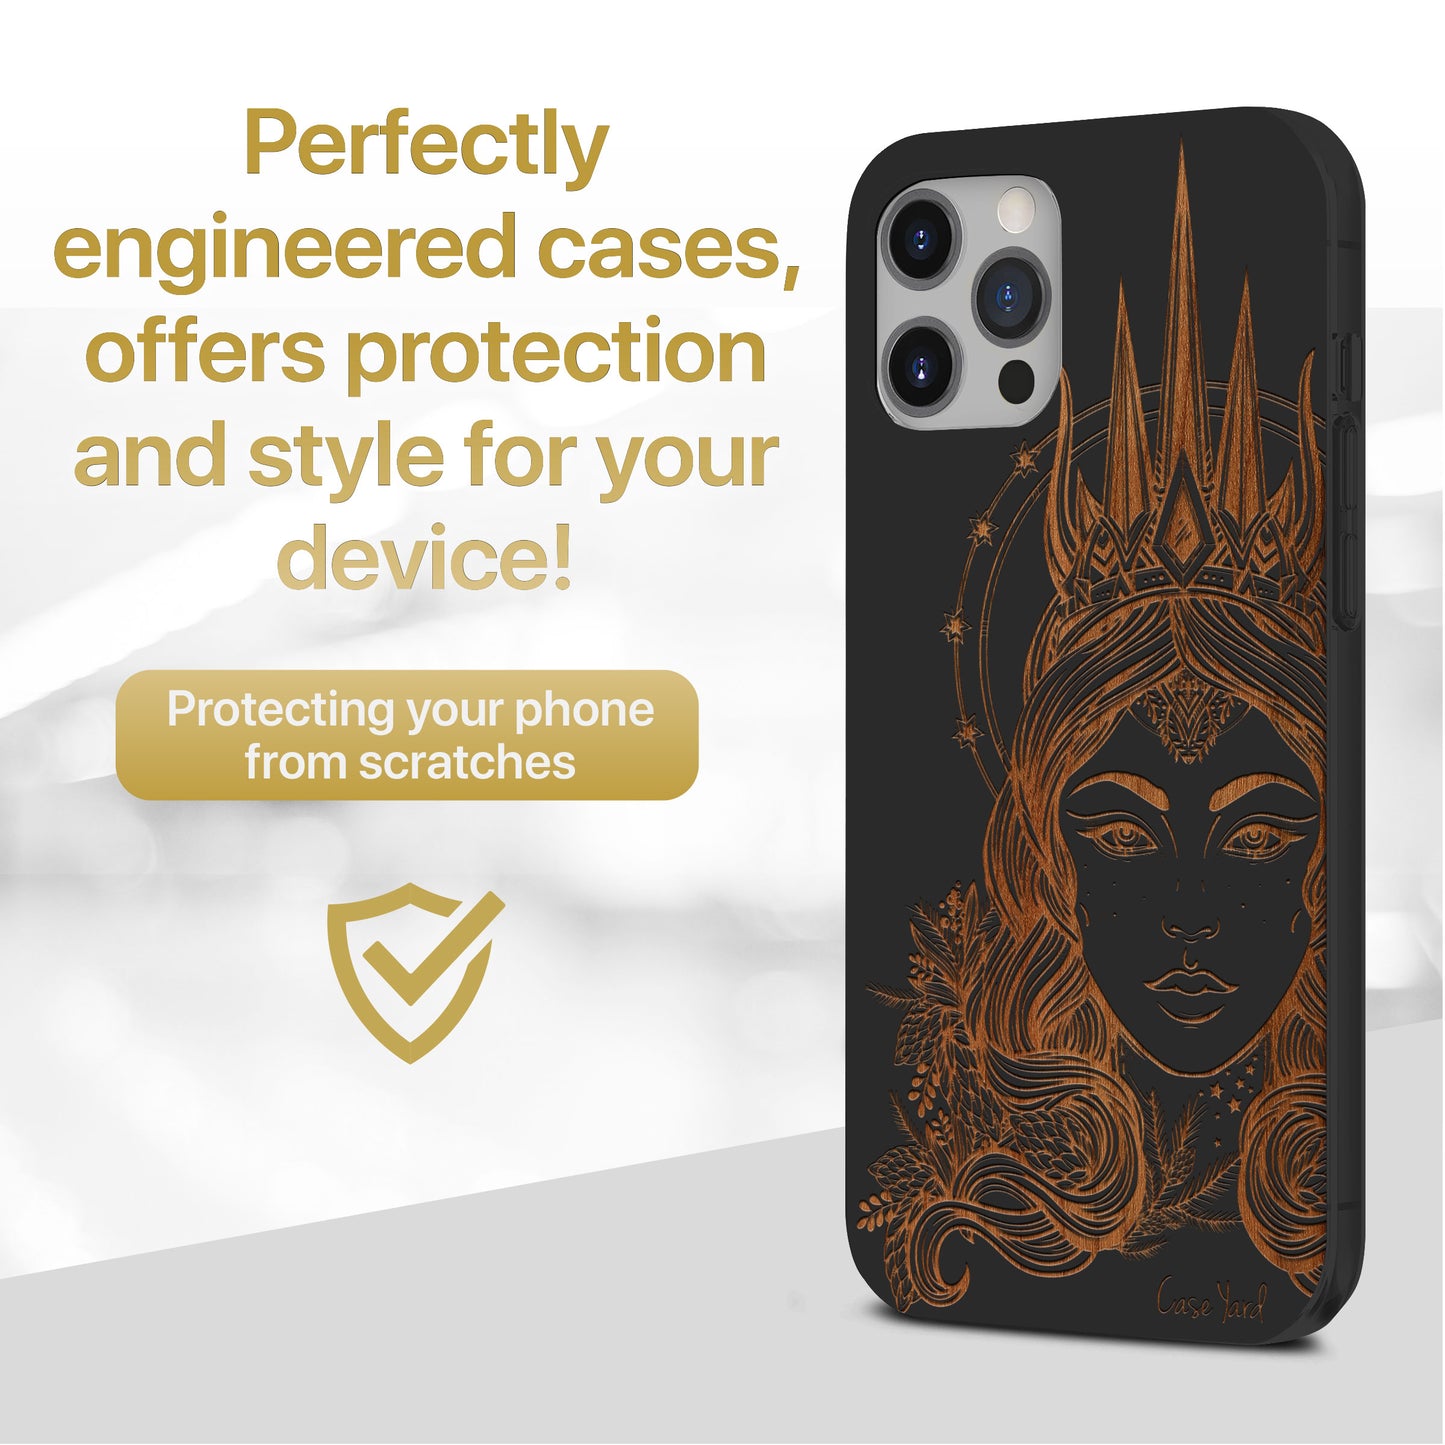 Wooden Cell Phone Case Cover, Laser Engraved case for iPhone & Samsung phone Northern Queen Design